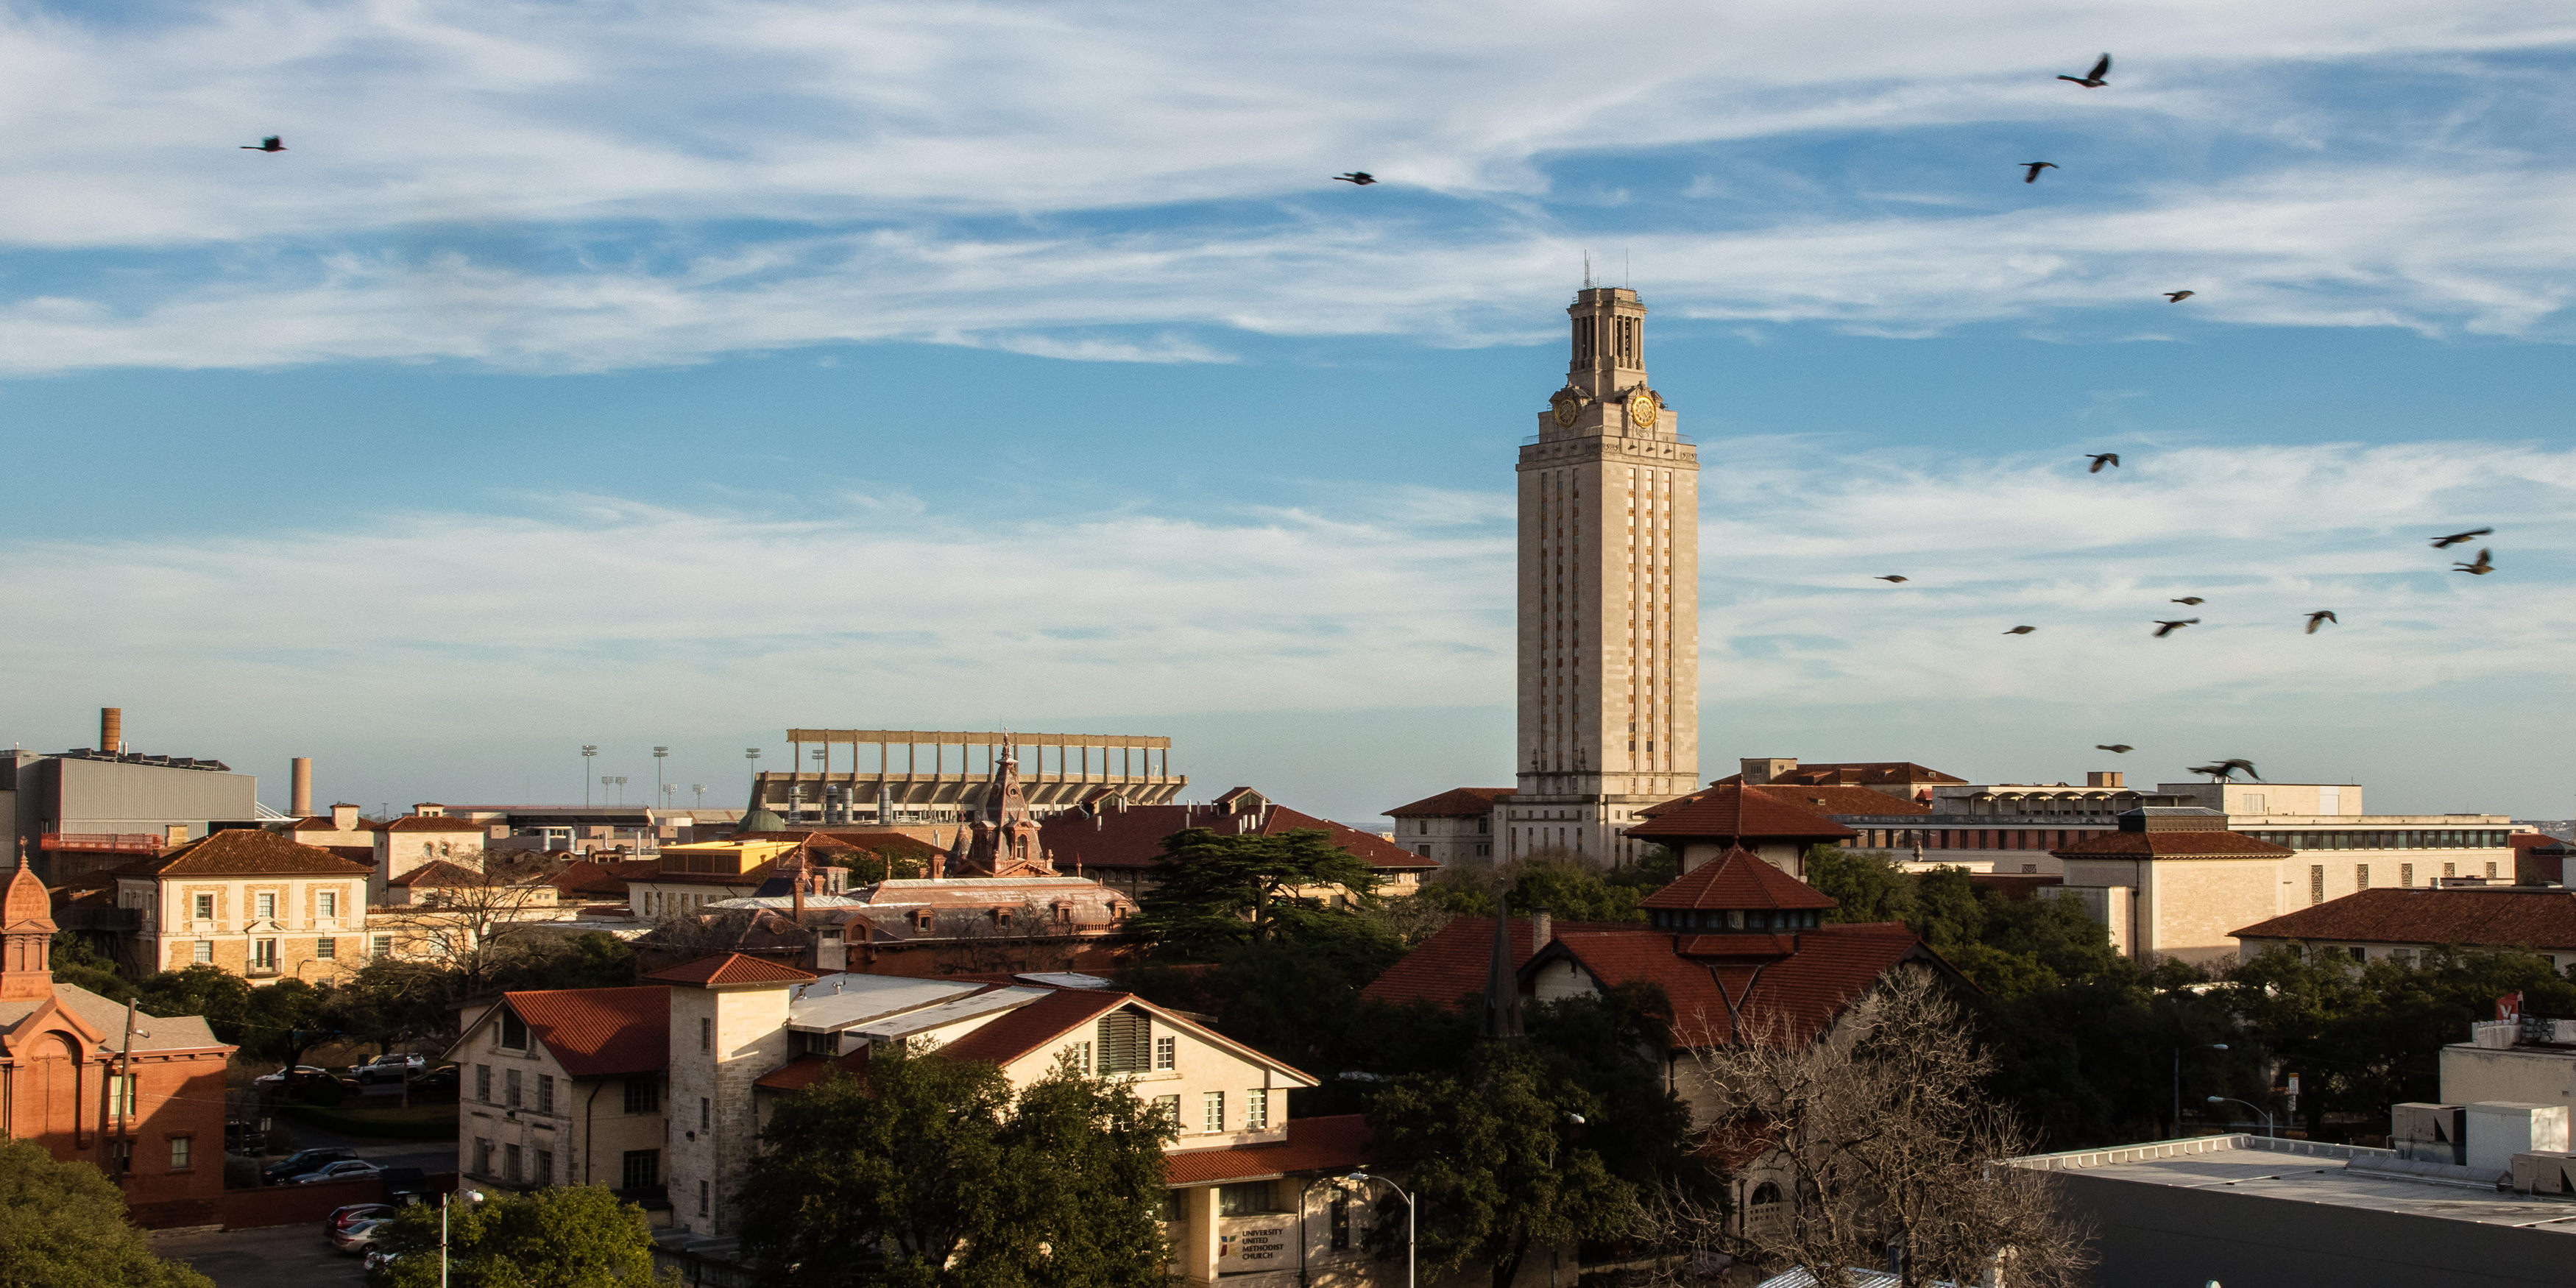 An overview of the campus at The University of Texas at Austin